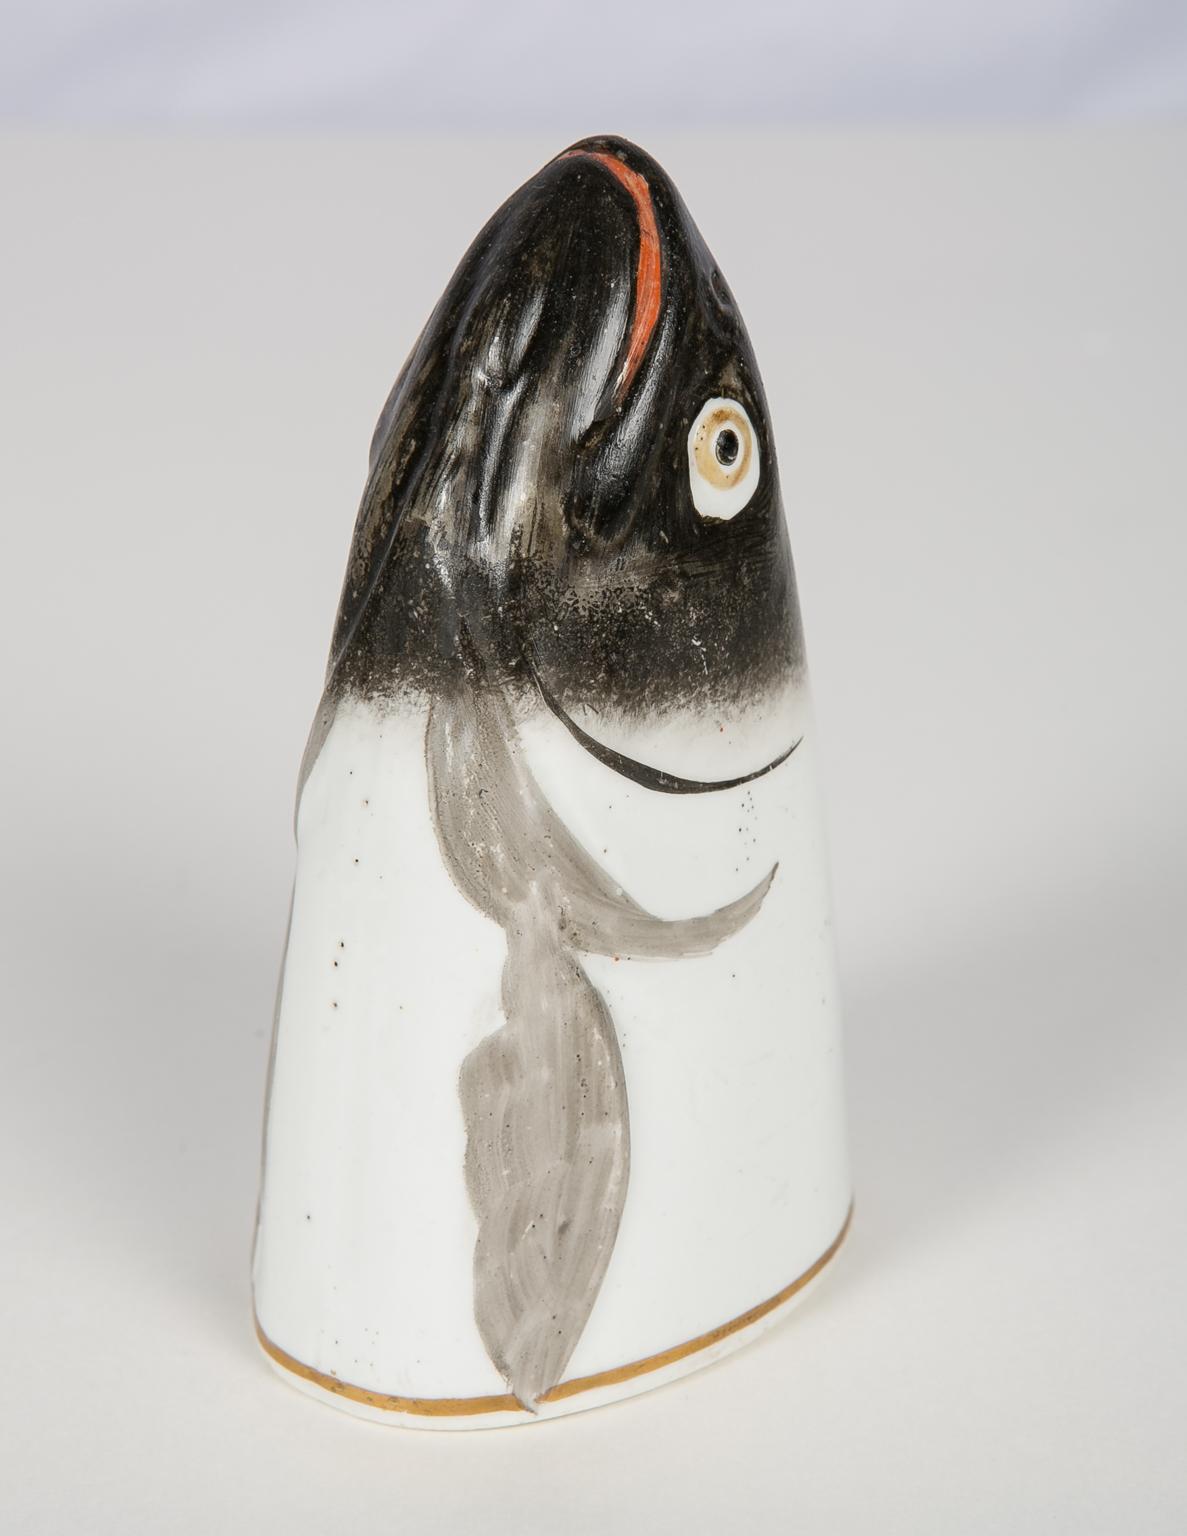 Stirrup Cup in the Form of a Fish 2